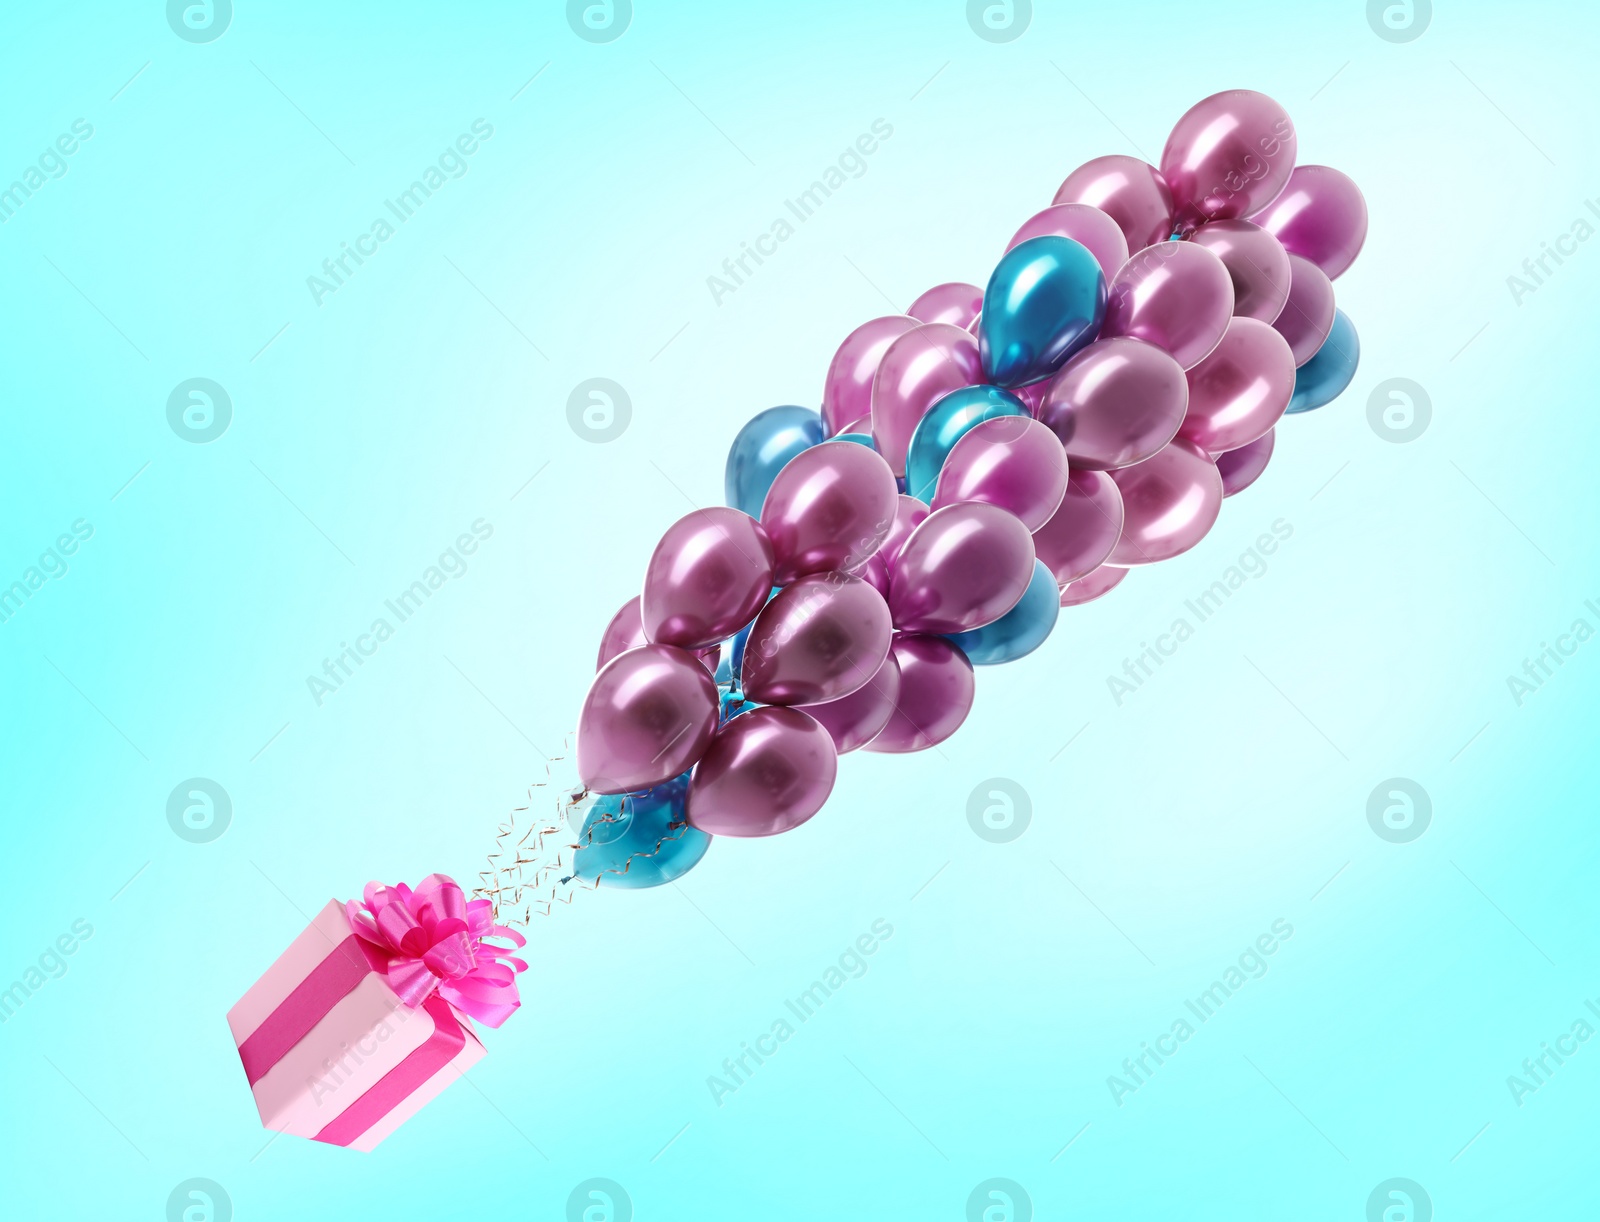 Image of Many balloons tied to pink gift box on light blue background